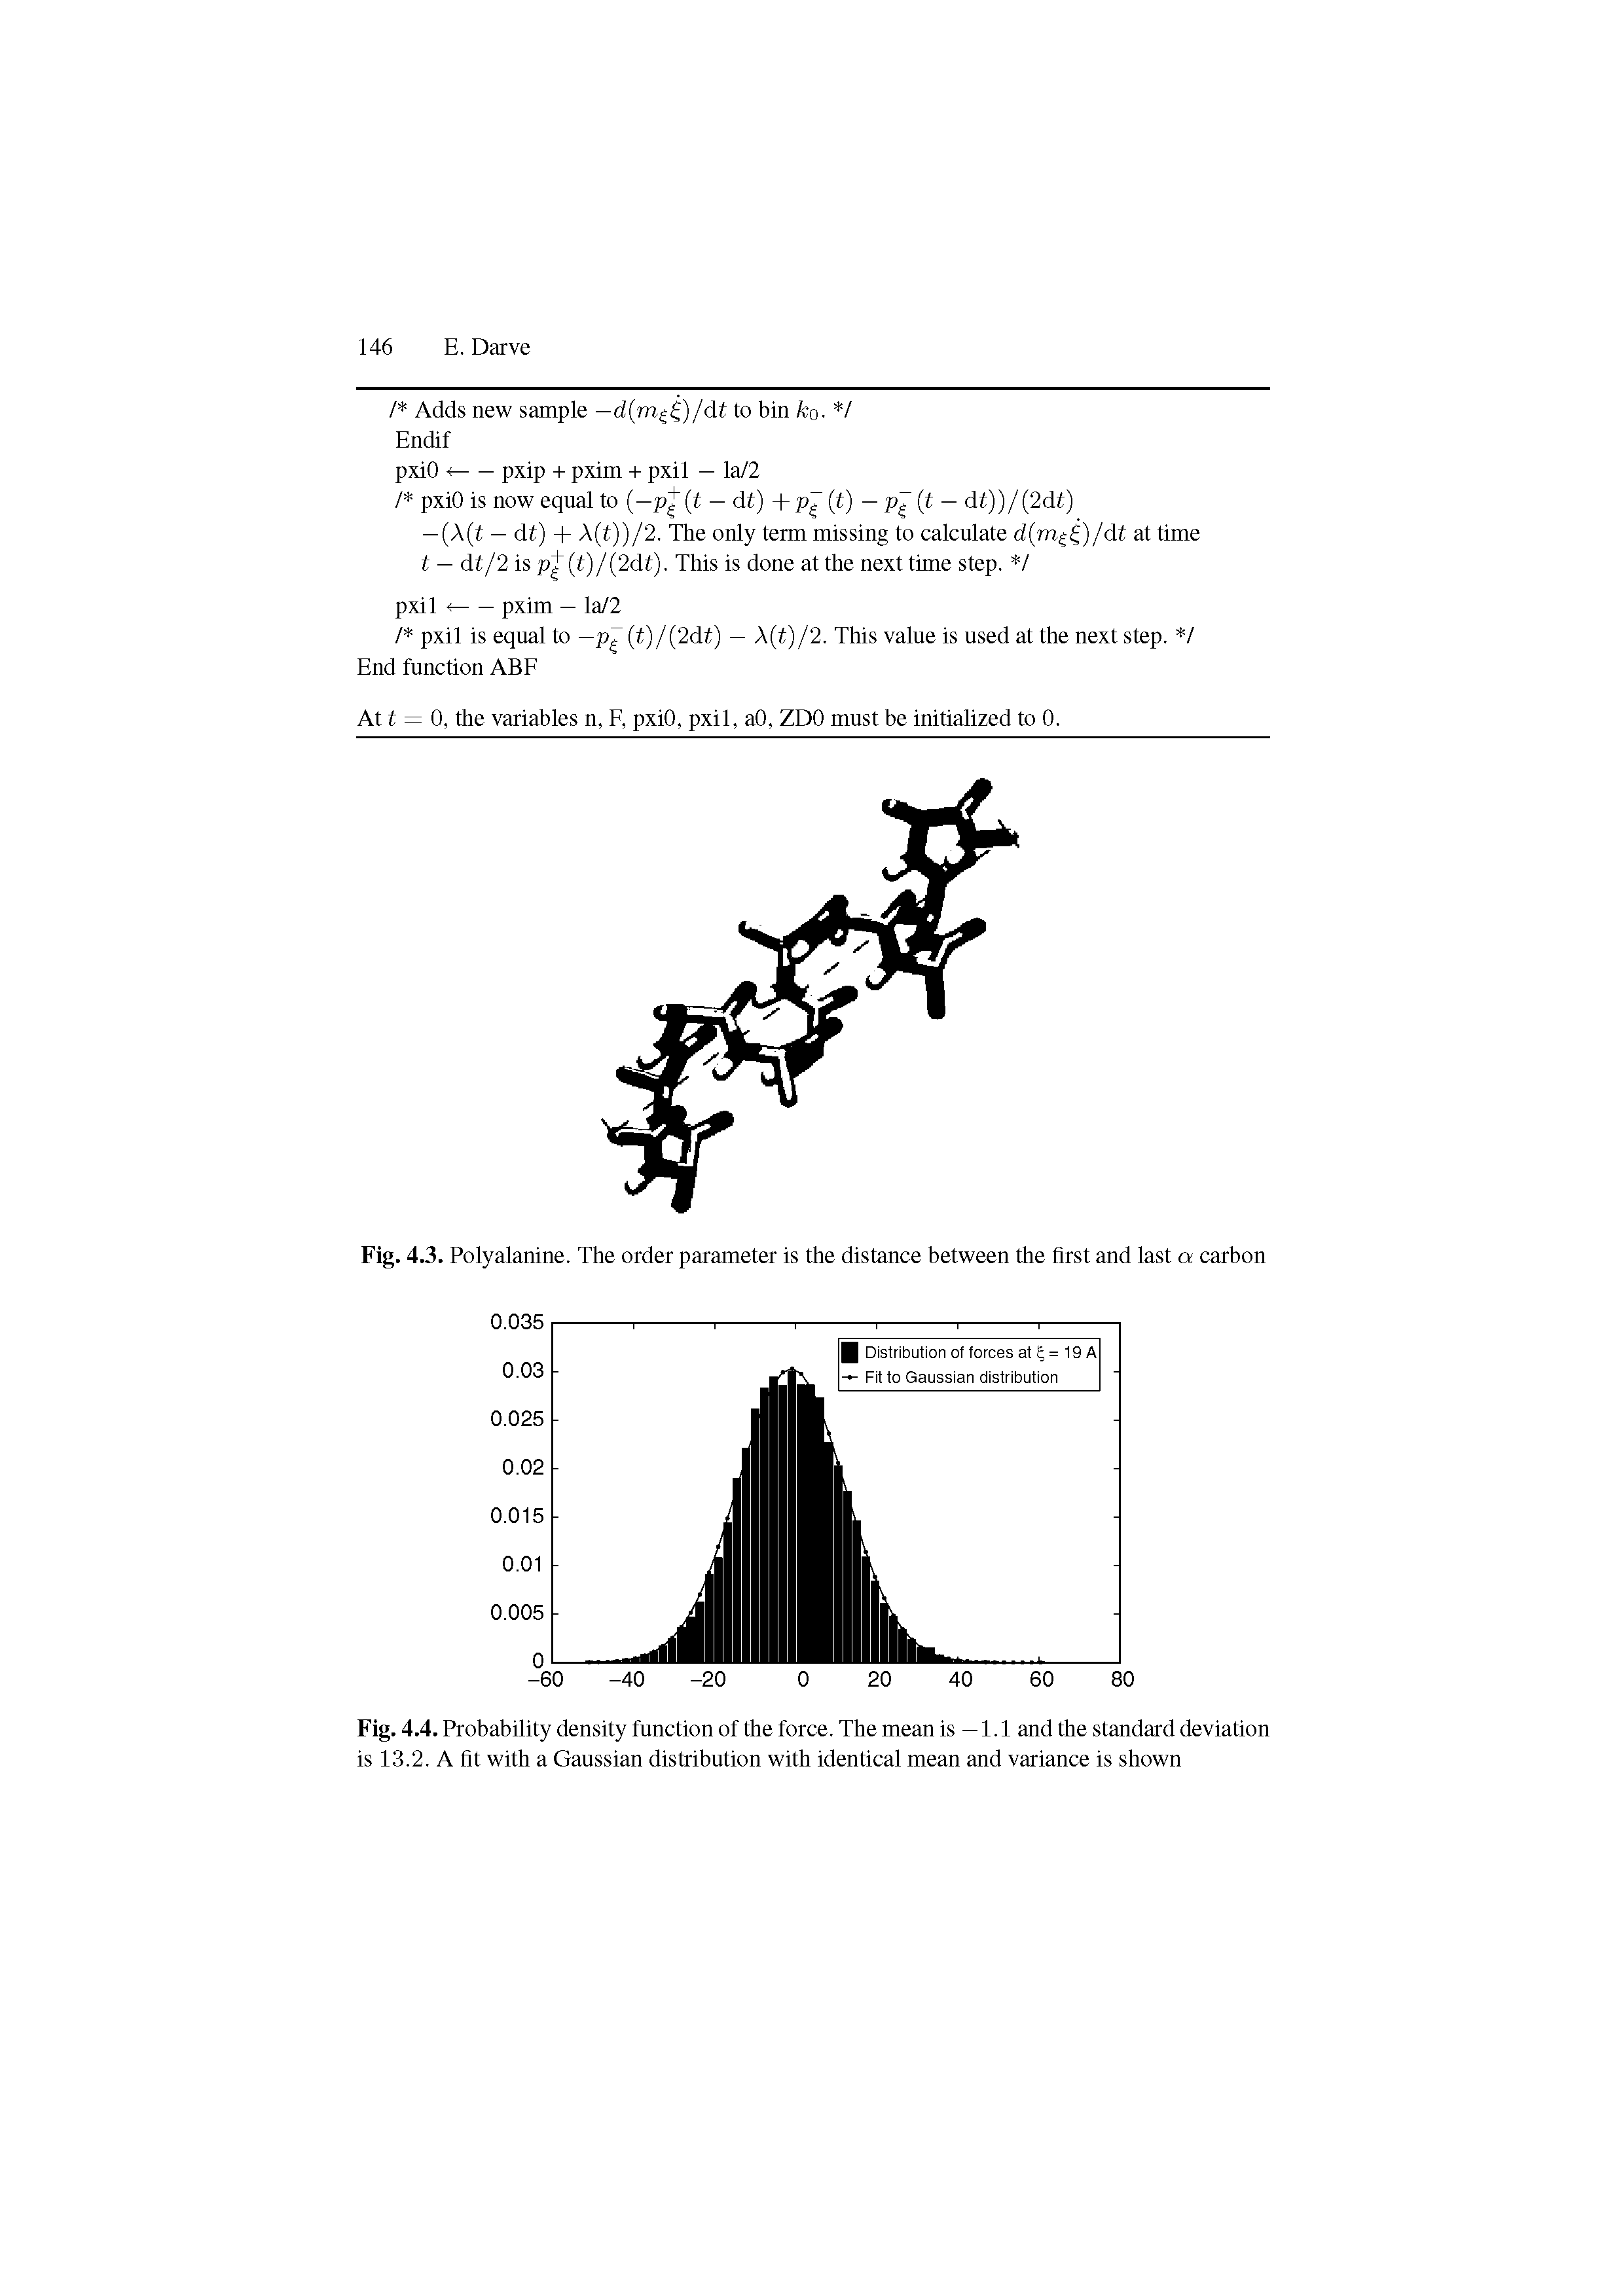 Fig. 4.4. Probability density function of the force. The mean is — 1.1 and the standard deviation is 13.2. A fit with a Gaussian distribution with identical mean and variance is shown...